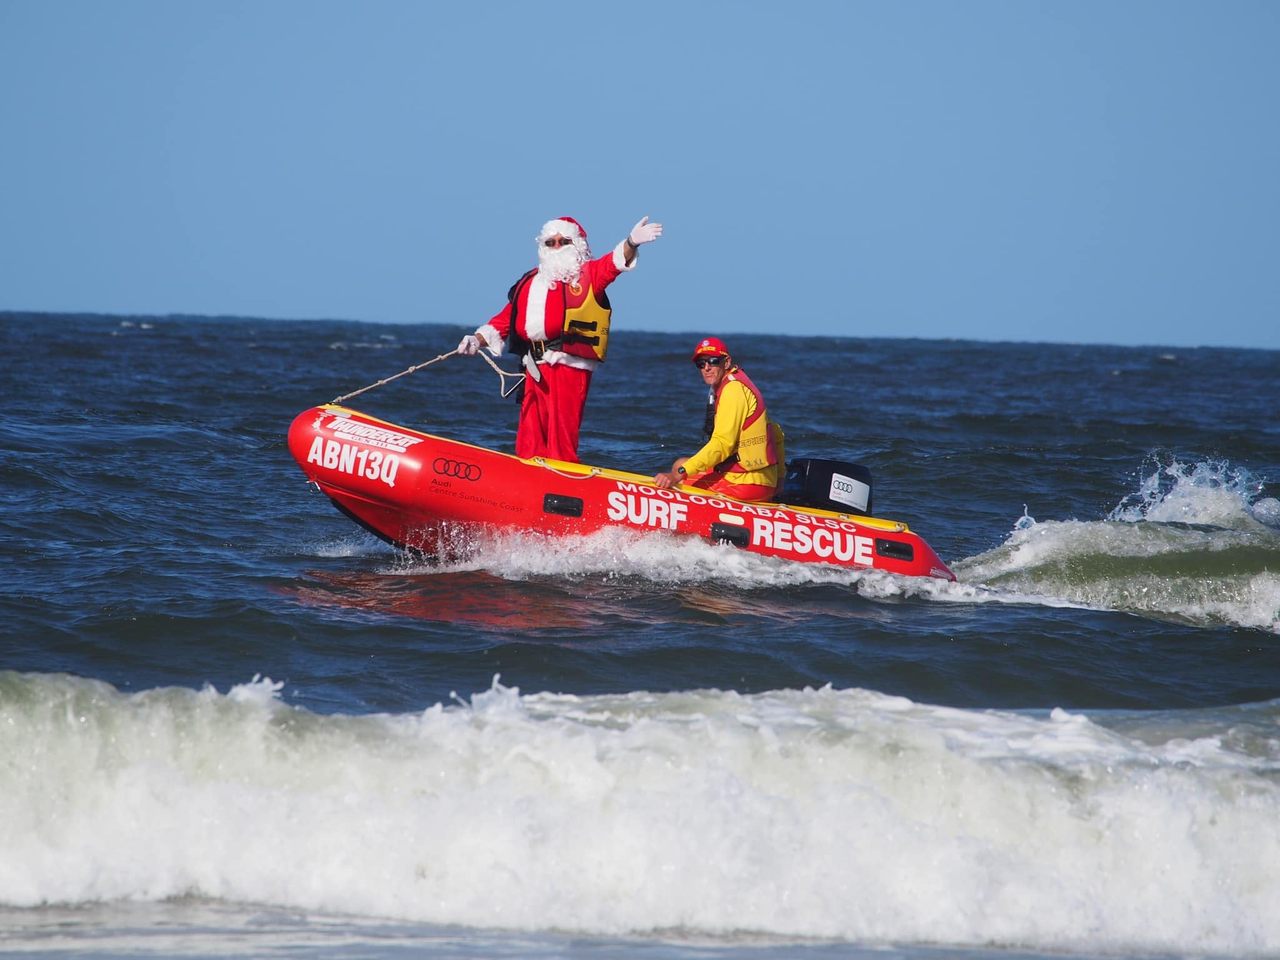 Some years, the water is so choppy, Santa arrives on Mooloolaba  beach in a soaking wet red suit.